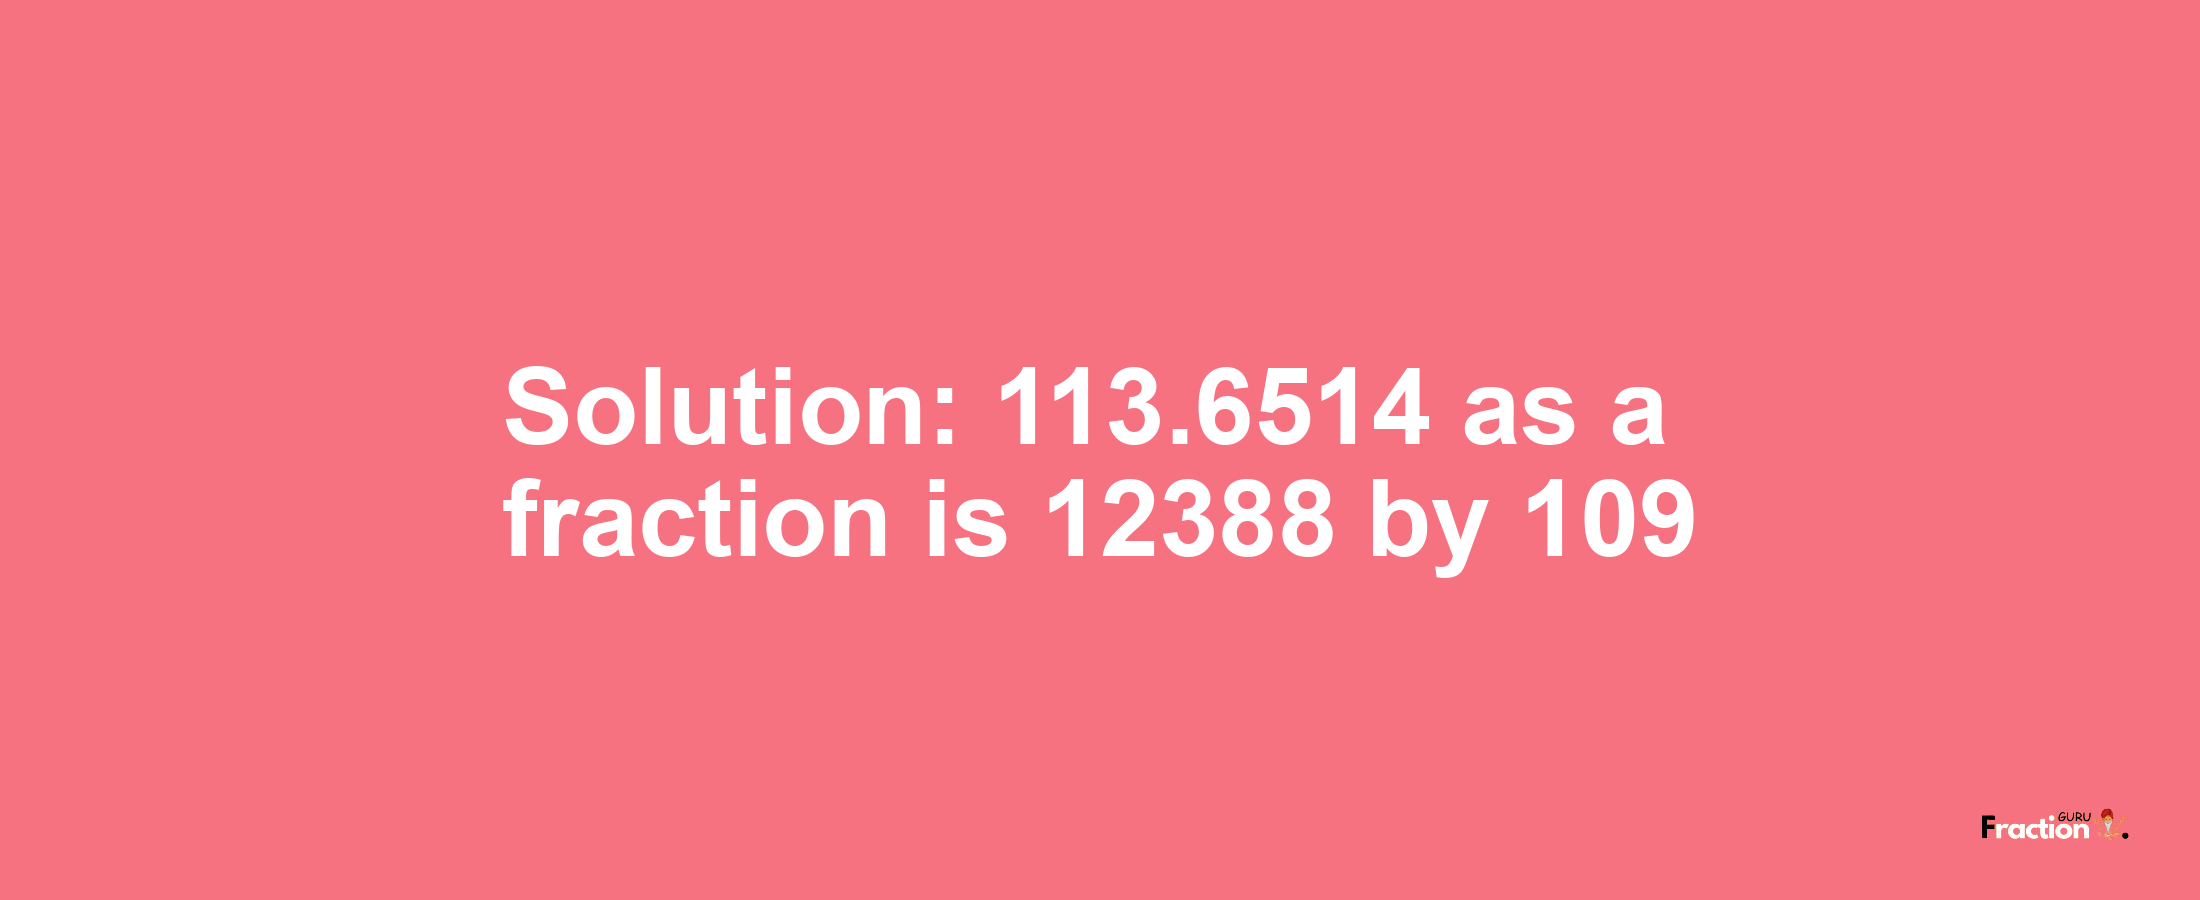 Solution:113.6514 as a fraction is 12388/109